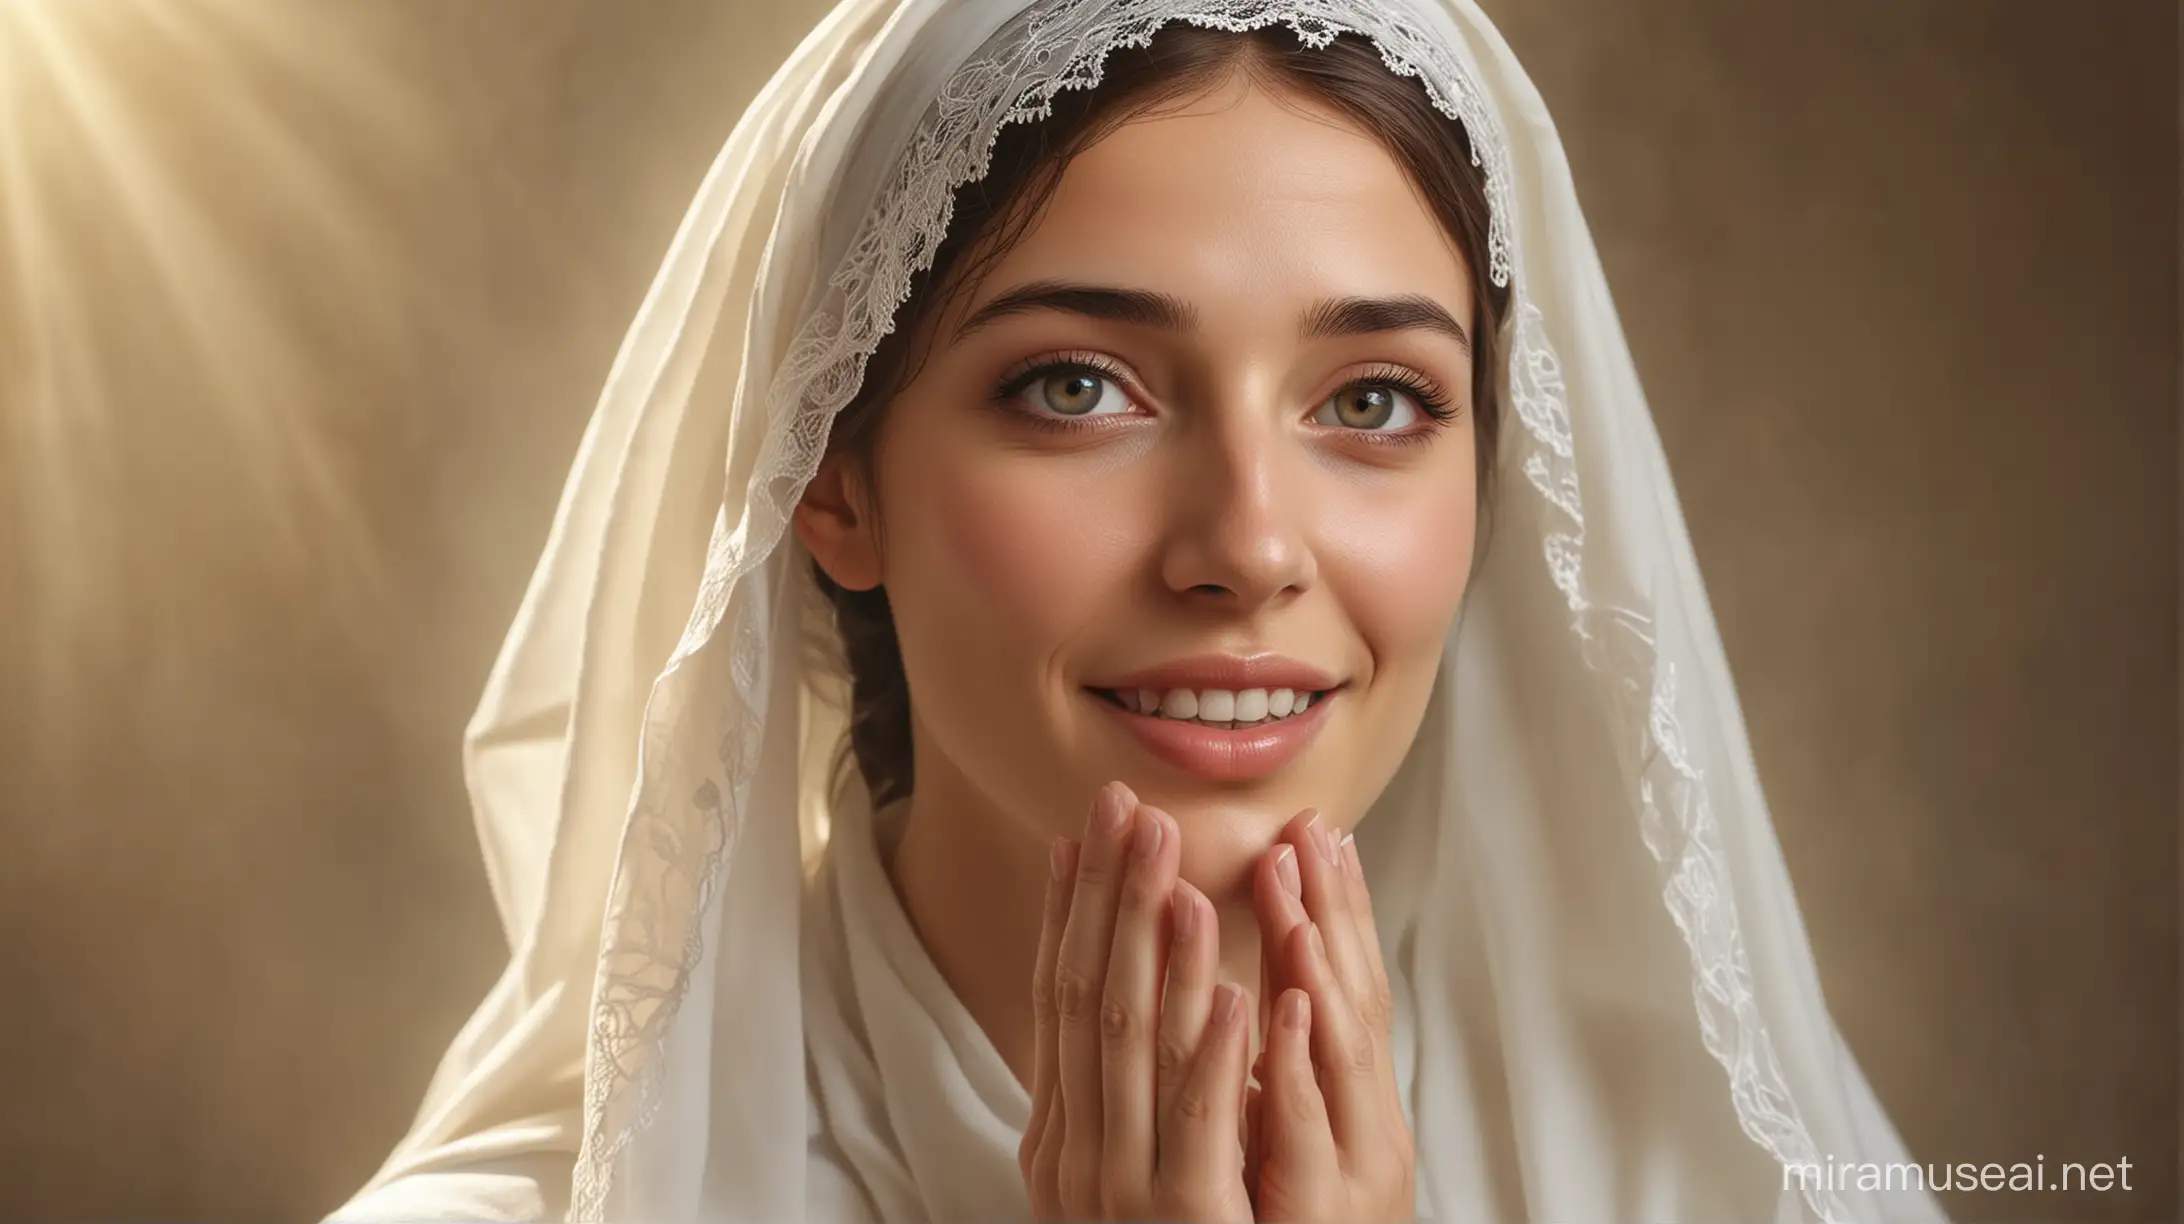 realistic image, Mary mother of Jesus Christ, young woman in clothes characteristic of the time, with a veil covering her head, very beautiful, angelic eyes, a slight smile on her face showing joy, with her hands together showing faith, in a heavenly environment of Gerusalem before of Christ